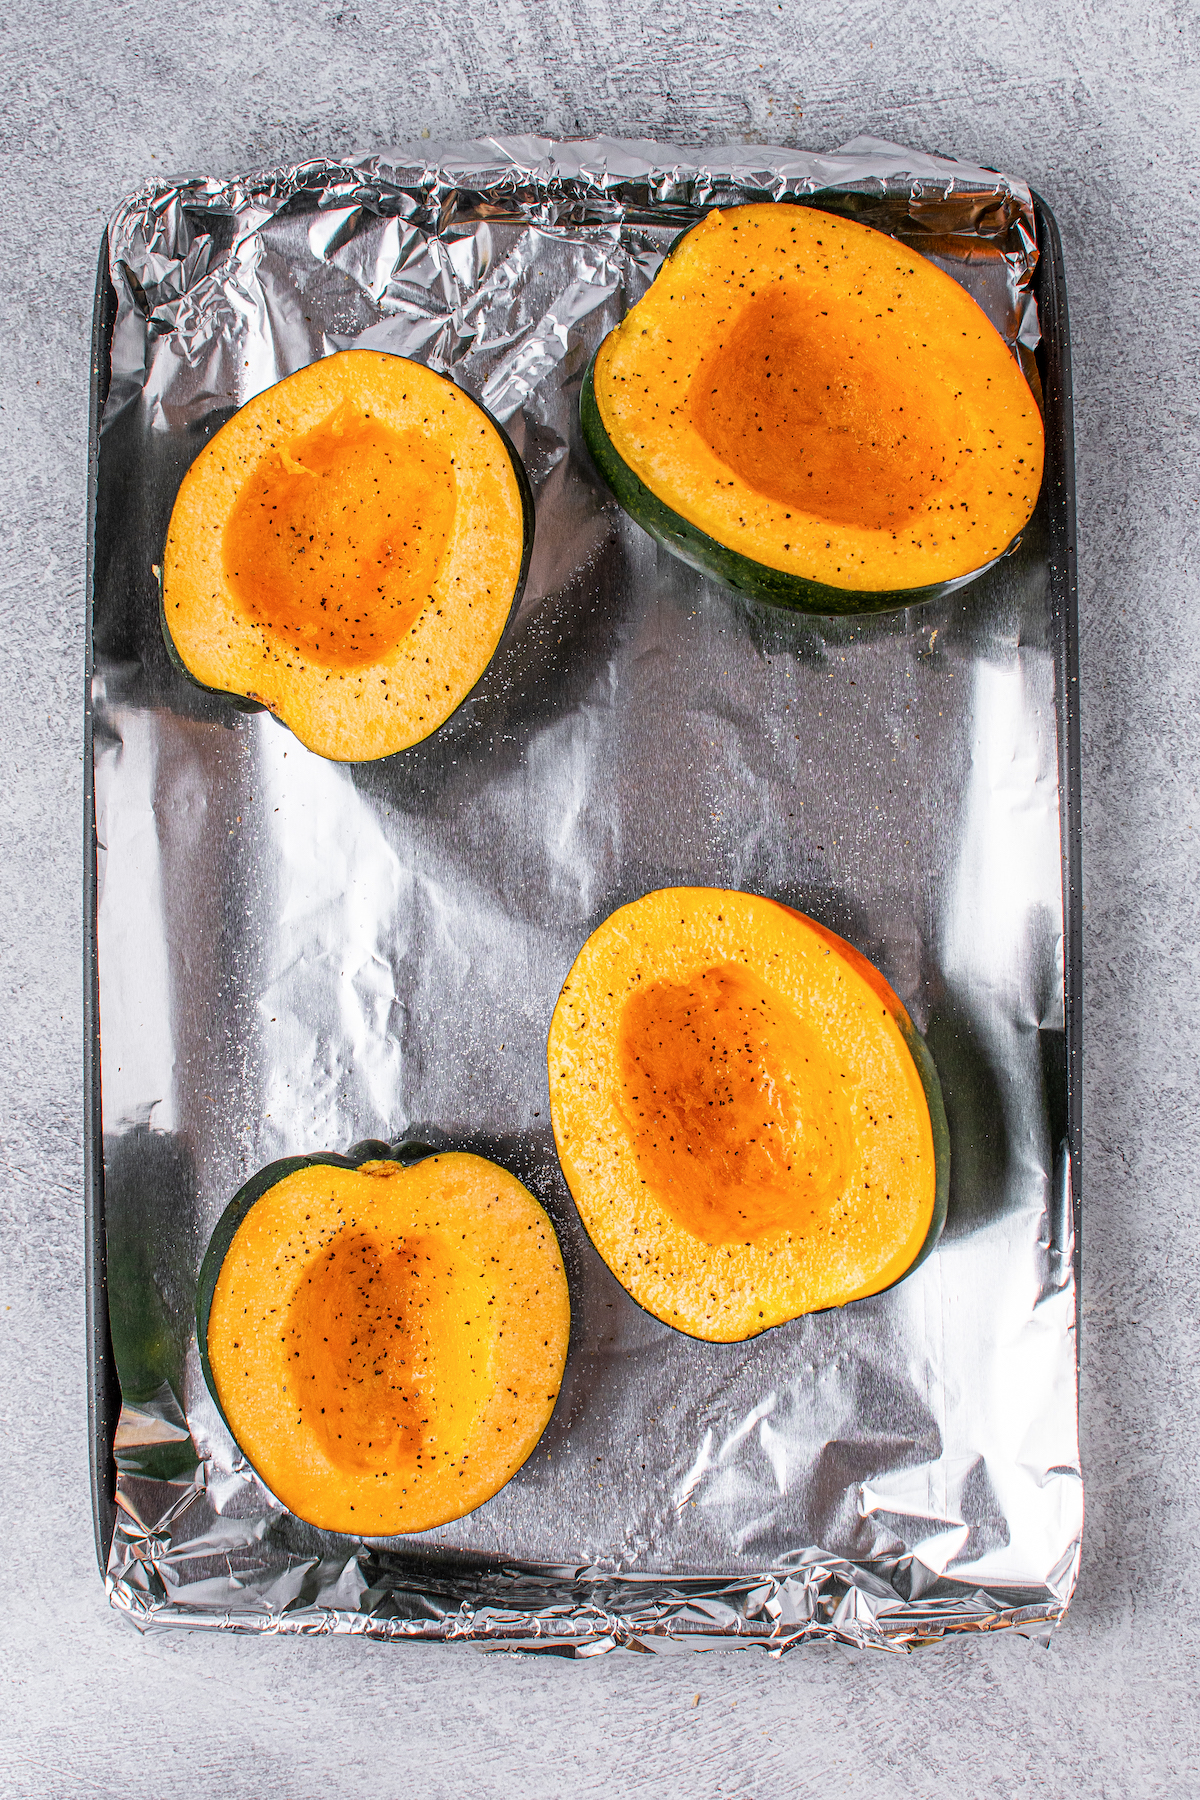 Halved and seeded acorn squashes in a baking tray.